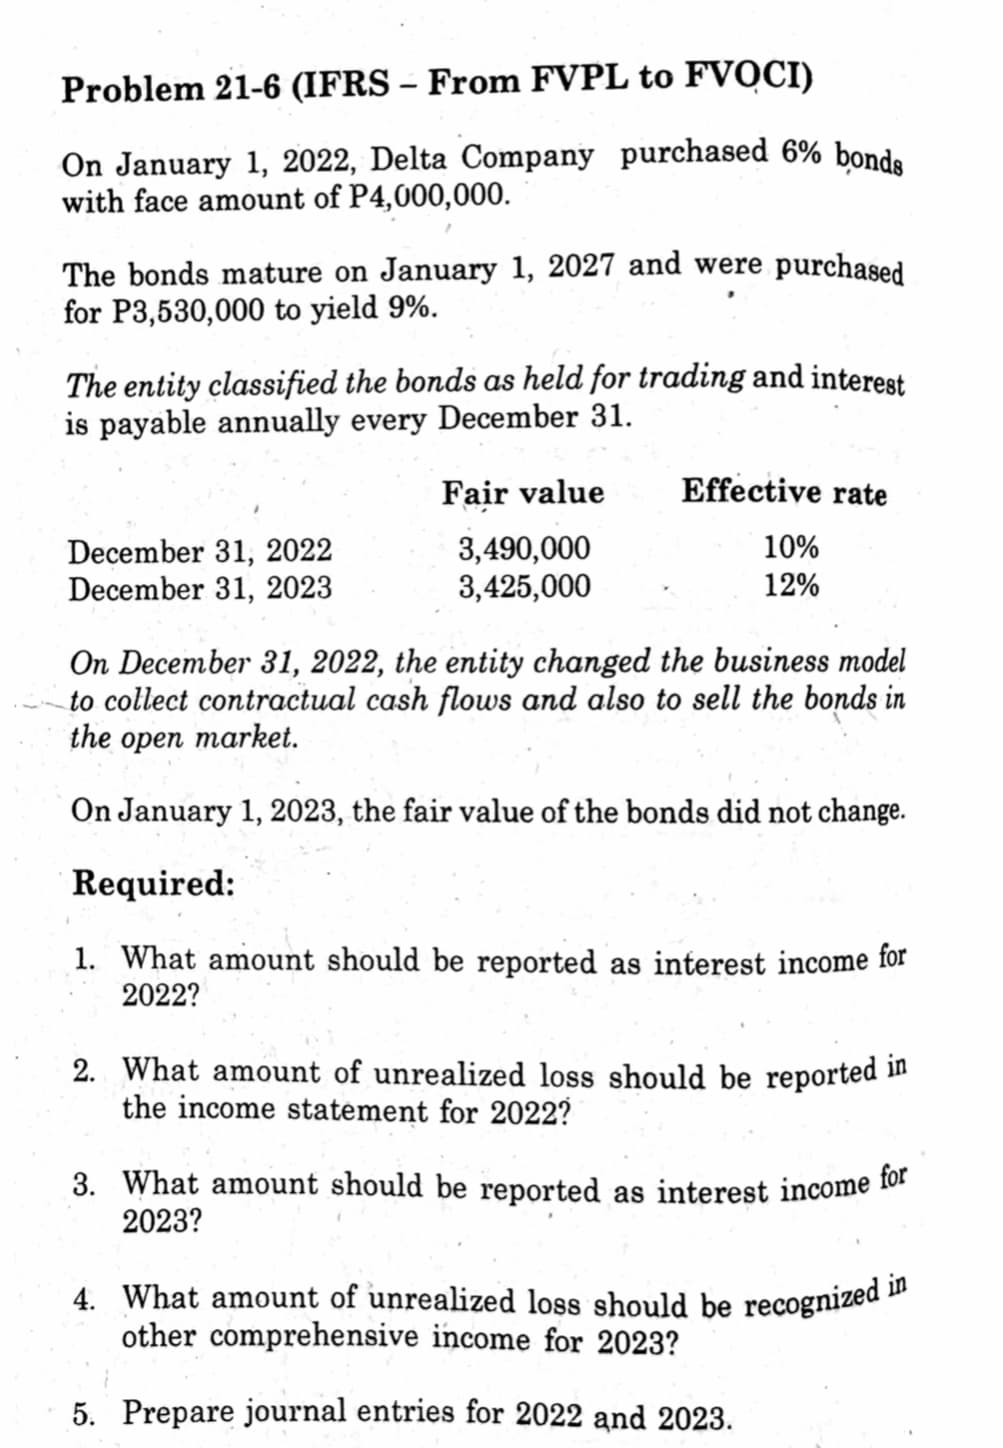 Problem 21-6 (IFRS - From FVPL to FVOCI)
On January 1, 2022, Delta Company purchased 6% bonds
with face amount of P4,000,000.
The bonds mature on January 1, 2027 and were
for P3,530,000 to yield 9%.
The entity classified the bonds as held for trading and interest
is payable annually every December 31.
December 31, 2022
December 31, 2023
purchased
Fair value
3,490,000
3,425,000
Effective rate
10%
12%
On December 31, 2022, the entity changed the business model
to collect contractual cash flows and also to sell the bonds in
the open market.
On January 1, 2023, the fair value of the bonds did not change.
Required:
1. What amount should be reported as interest income for
2022?
2. What amount of unrealized loss should be reported in
the income statement for 2022?
3. What amount should be reported as interest income for
2023?
4. What amount of unrealized loss should be recognized in
other comprehensive income for 2023?
5. Prepare journal entries for 2022 and 2023.